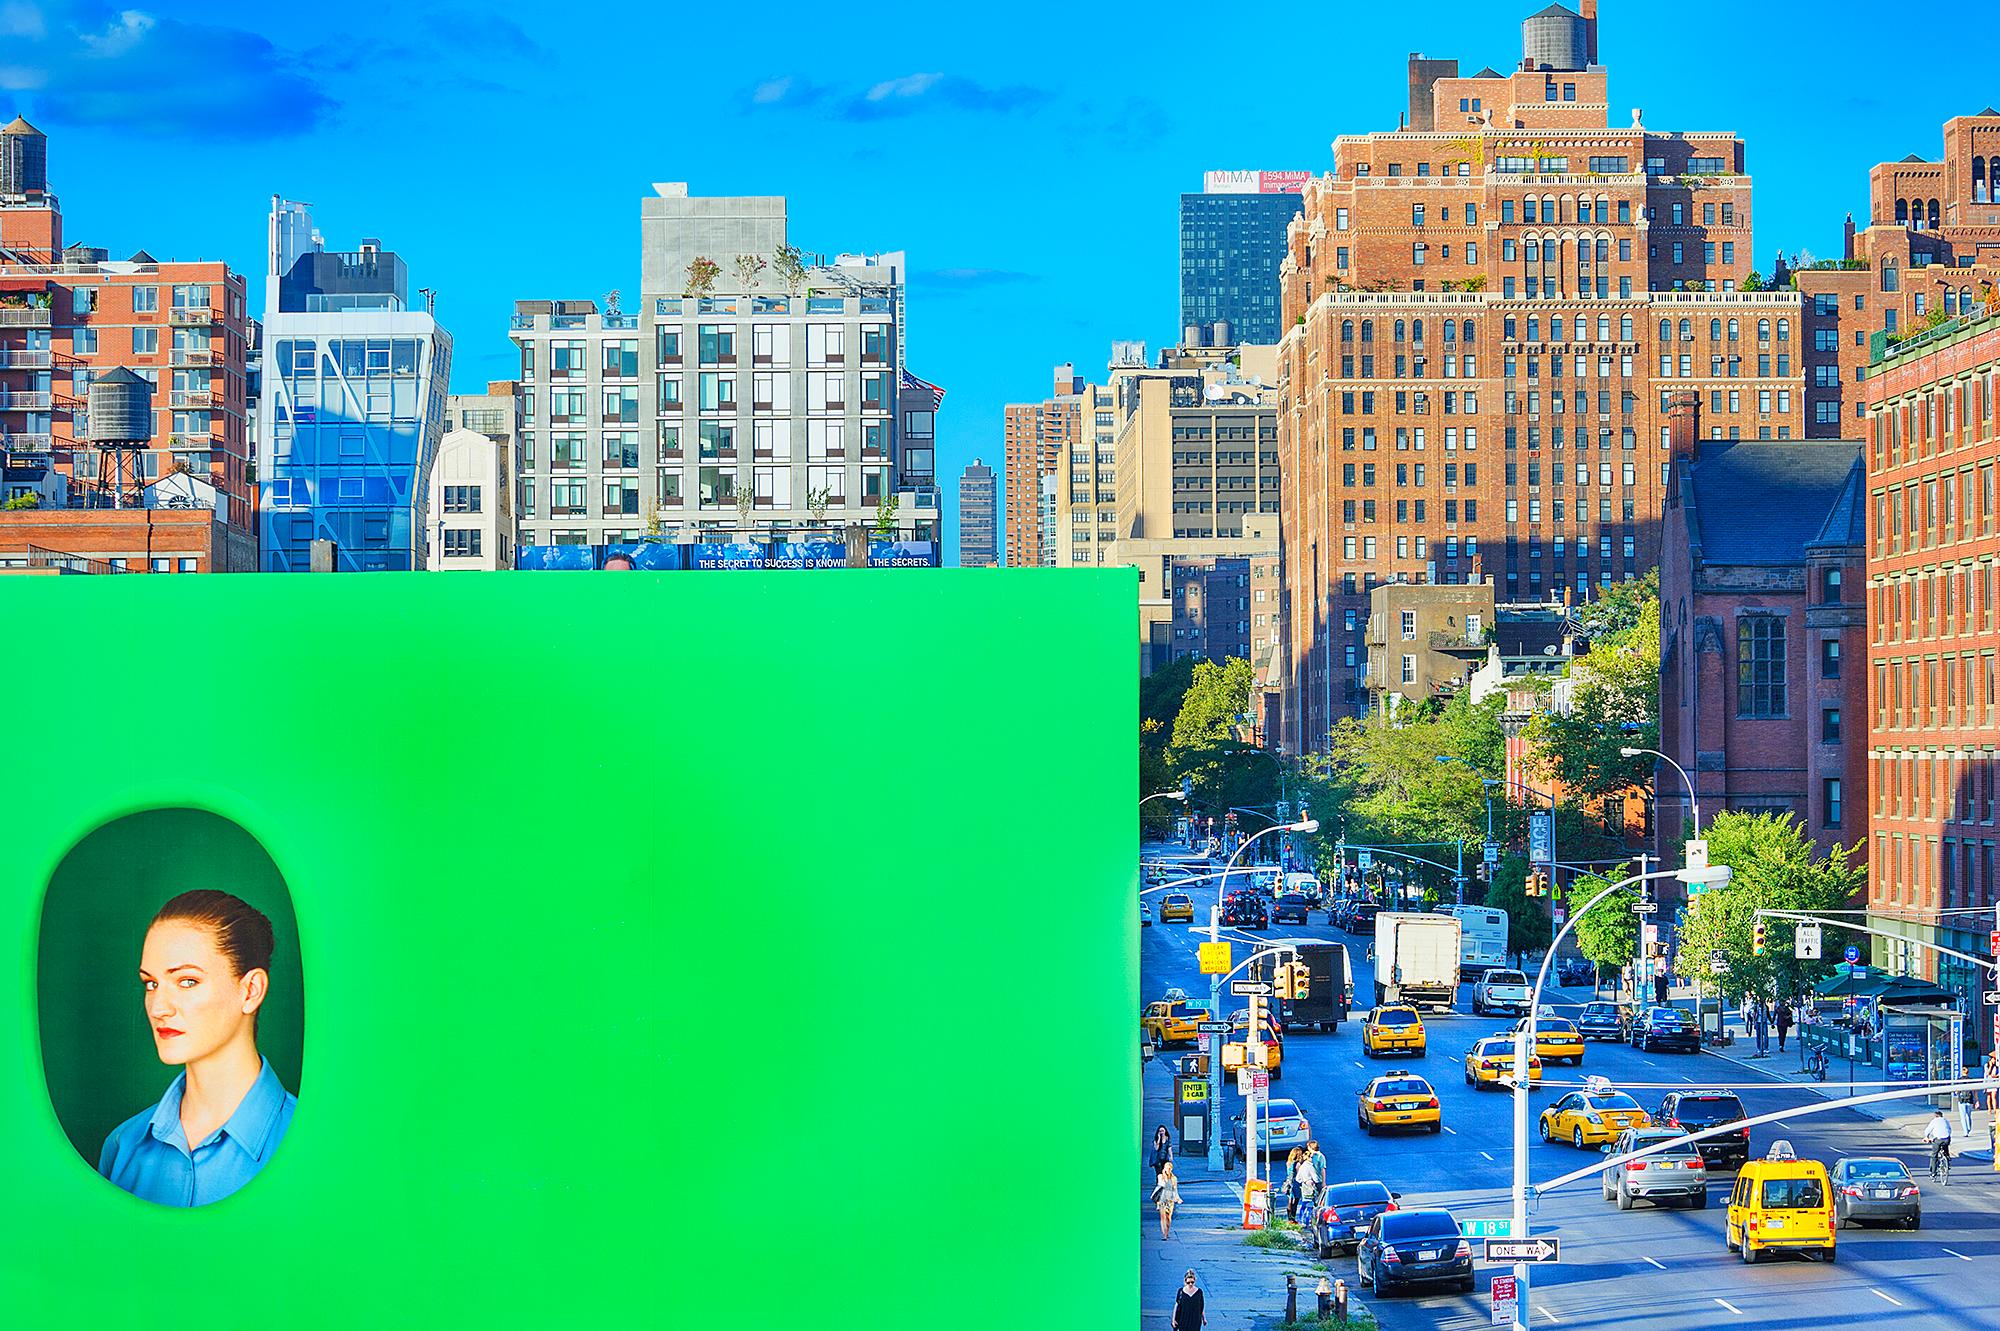 Mitchell Funk Landscape Photograph - Unexpected Billboard from The High Line Chelsea 